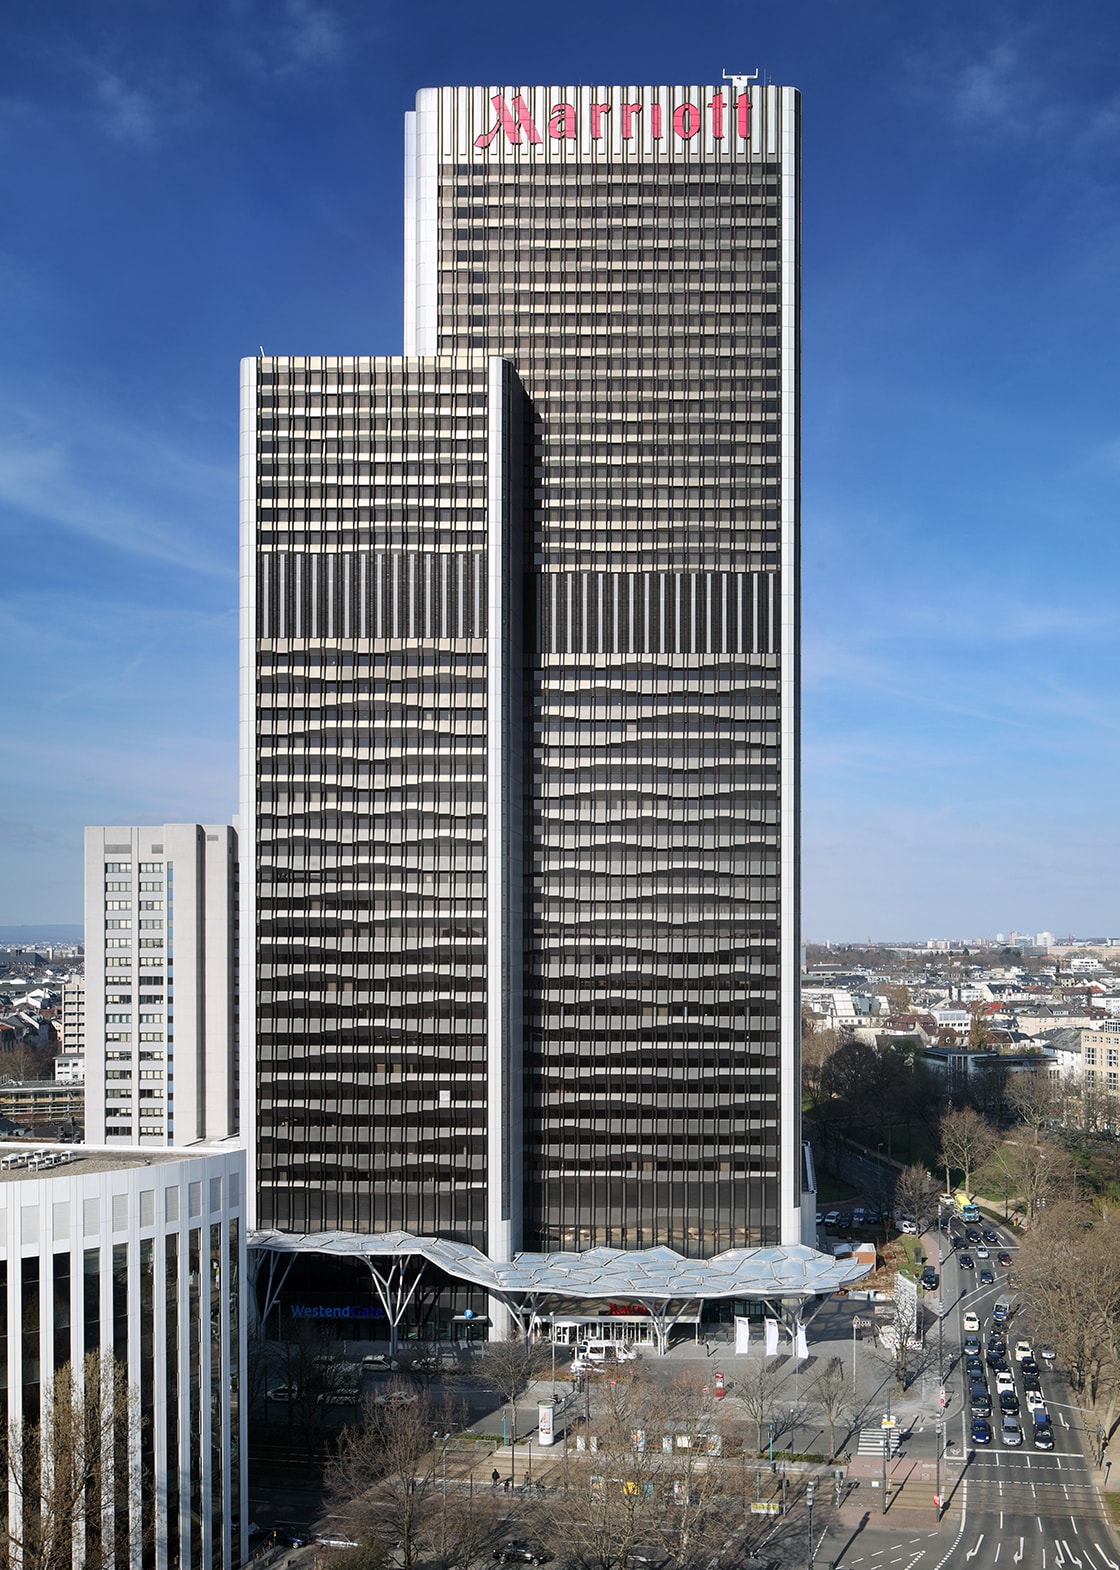 Design Enhancement, Tenant Fit-Out, Facade Revitalisation, Canopy, and Plaza Design for the Westend Gate Skyscraper in Frankfurt